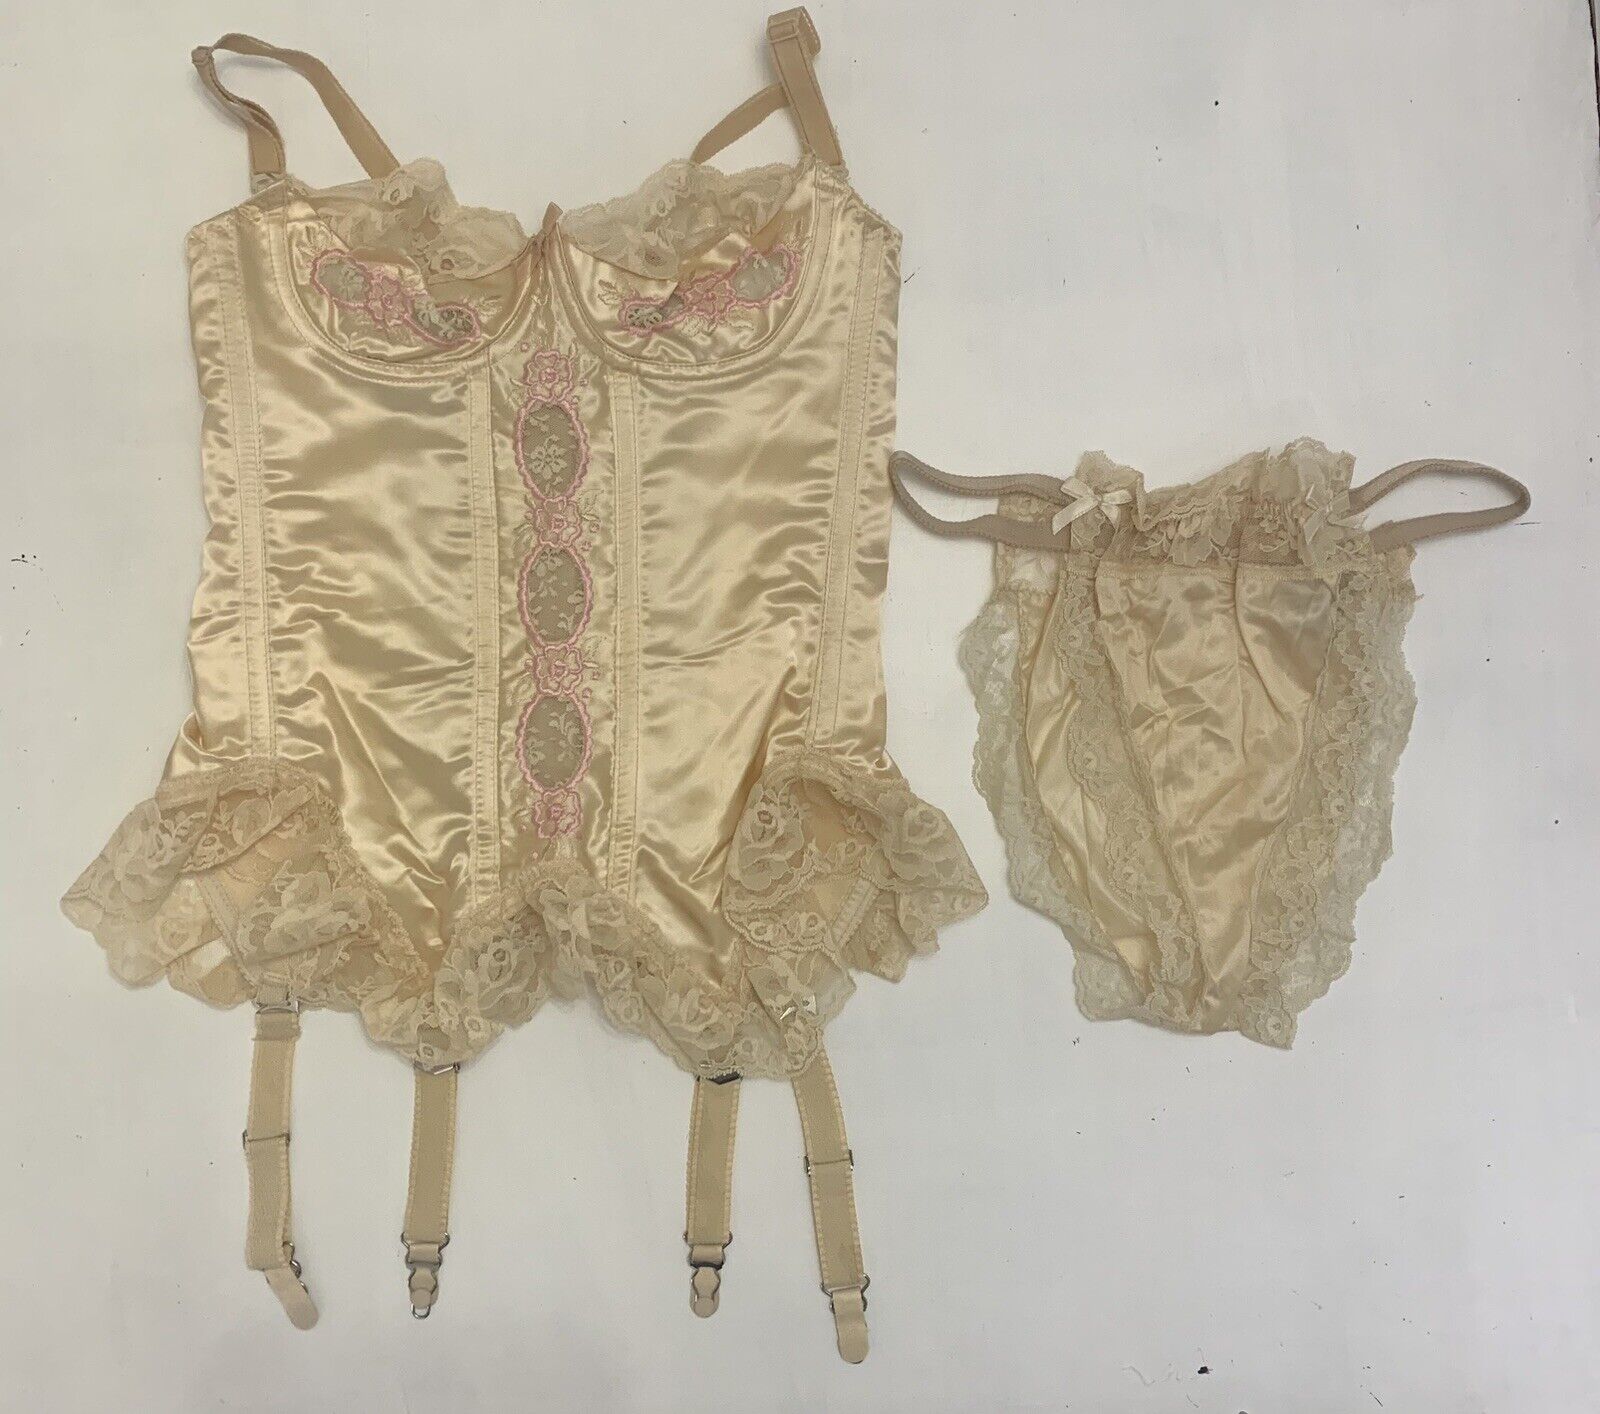 Darling Vintage Teddy Corset W/4 Garters And Ruffle Panty Sz 34/M Made In USA